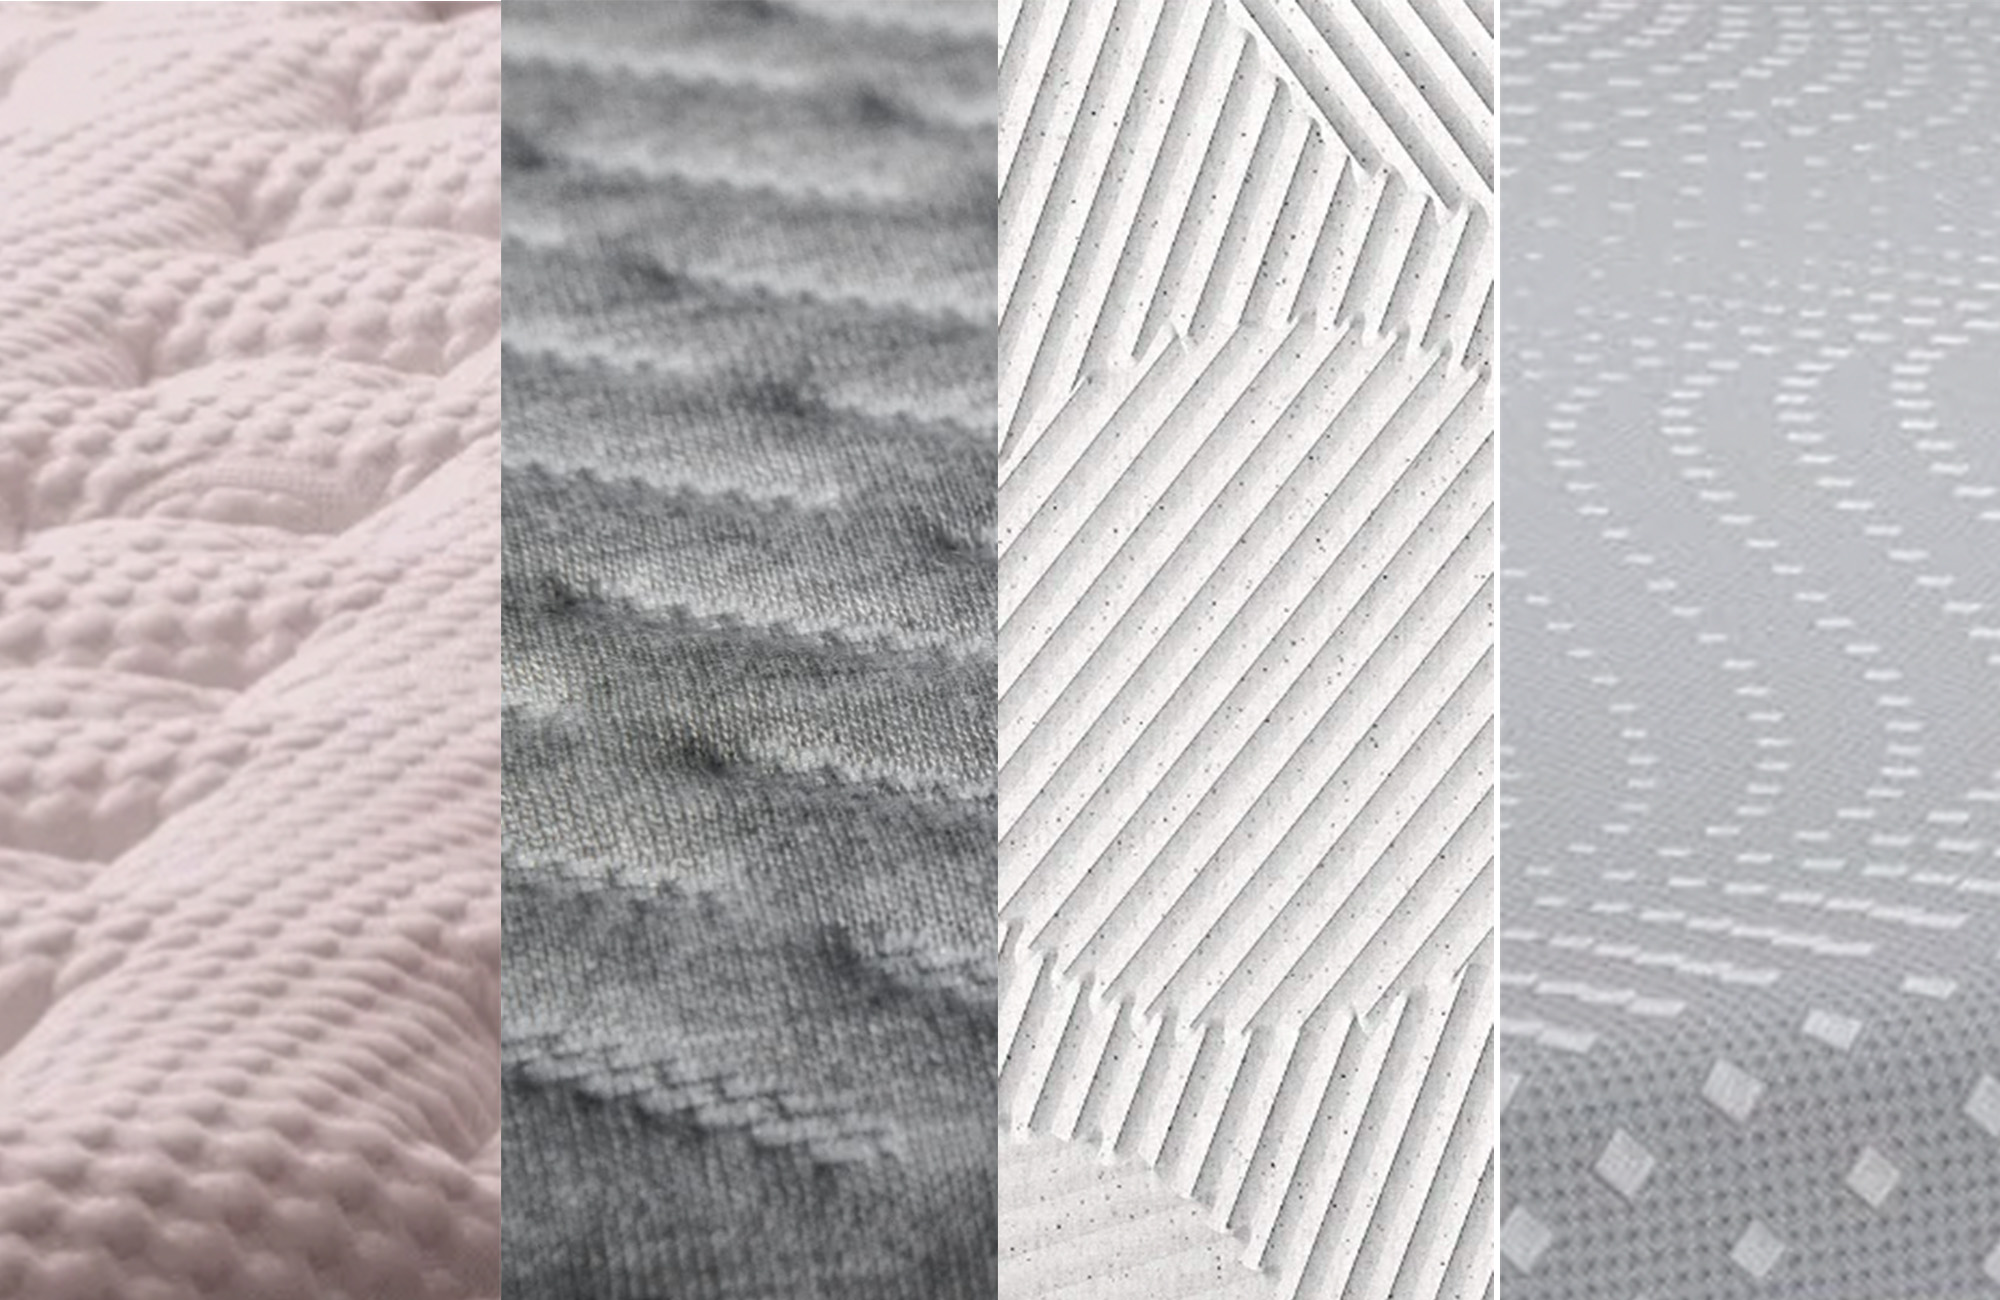 Textured details of mattresses from Helix, Tuft & Needle, Sealy, and Casper.